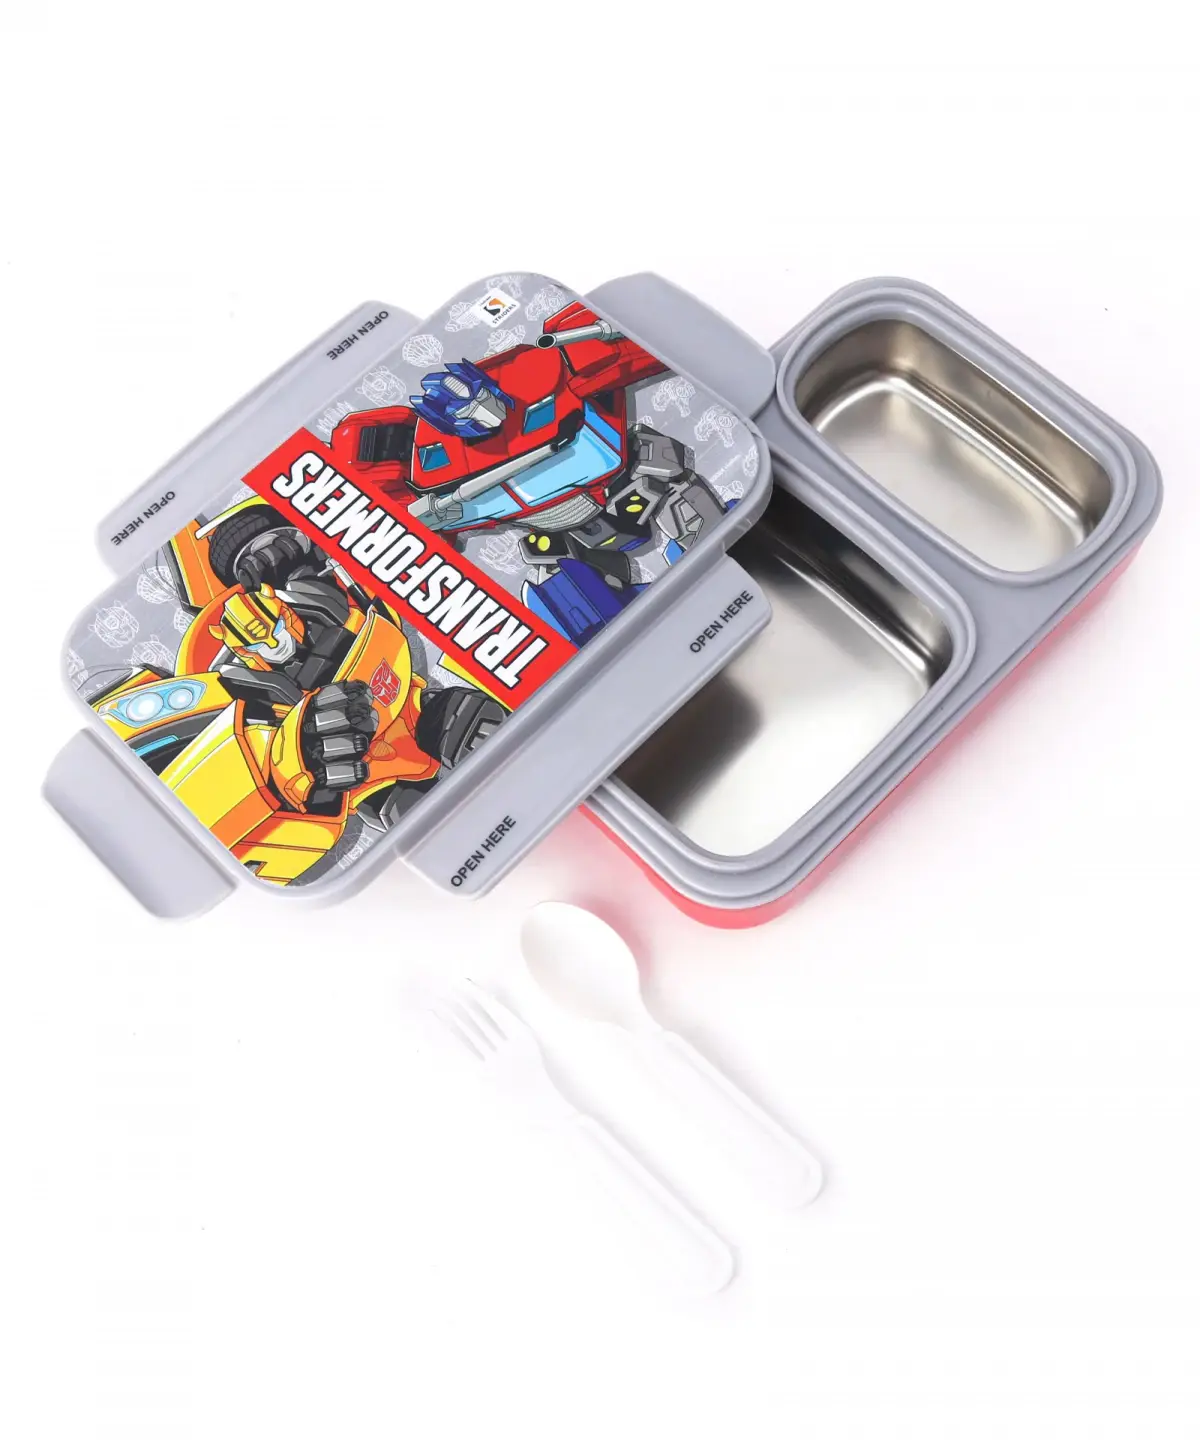 Striders Transformers Lunch Box with Dual Compartments, 3Y+, Multicolour